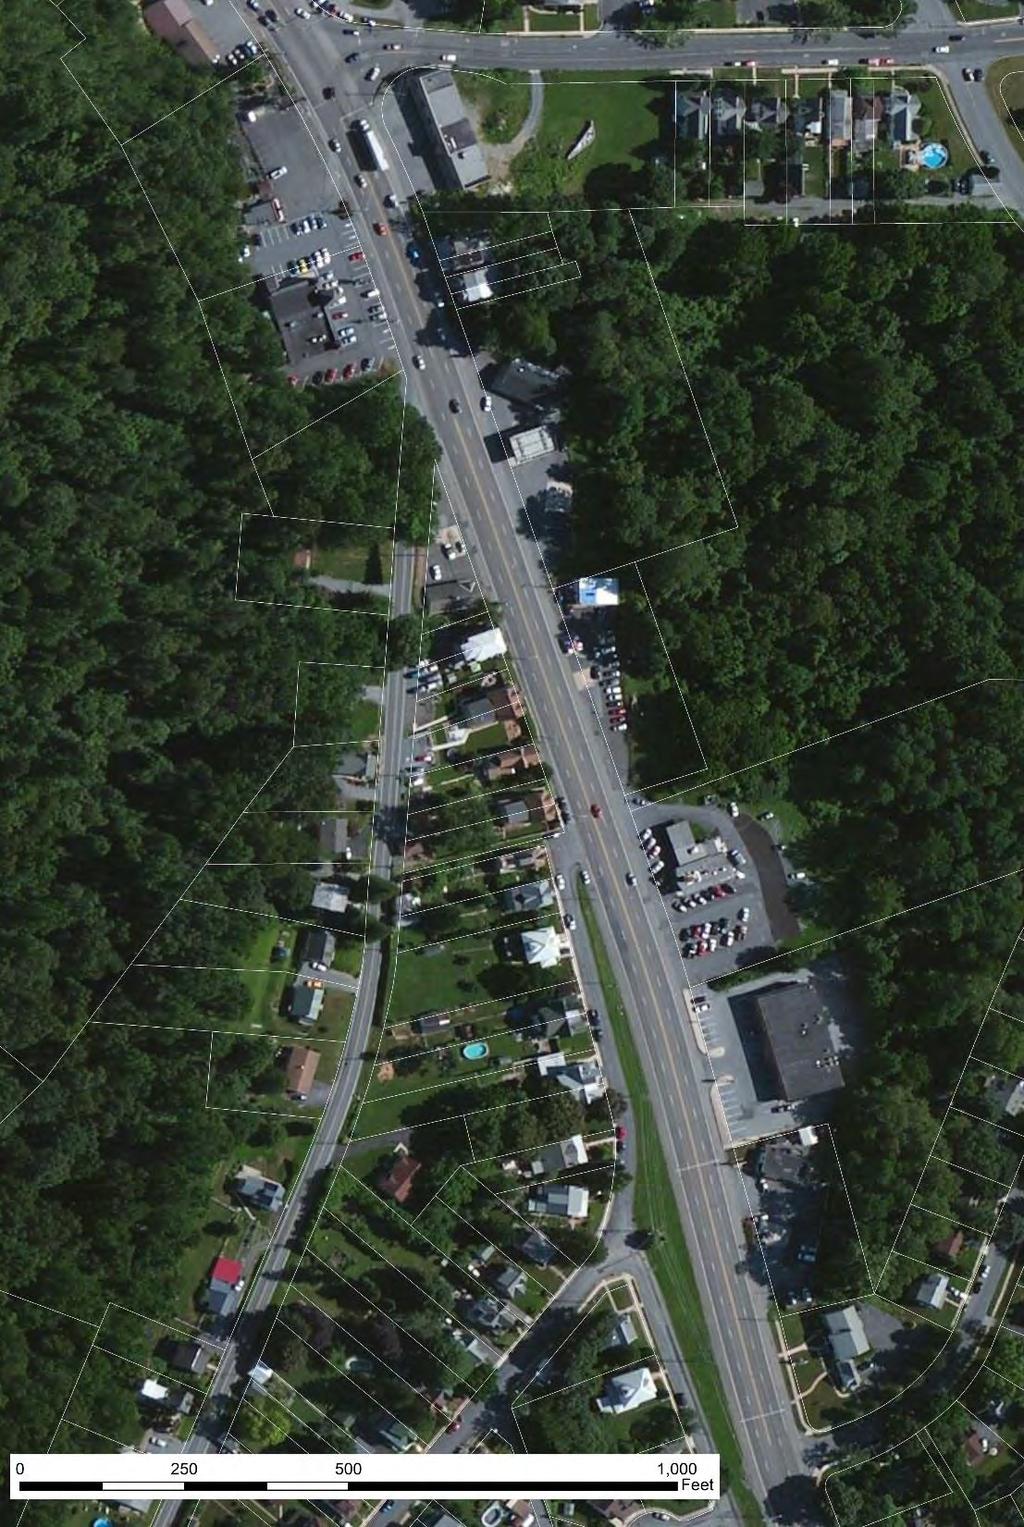 Existing Conditions Oley Turnpike BEECHWOOD DRIVE TO OLEY TURNPIKE (Northern Section) Mix of land uses, including single family residential homes and retail